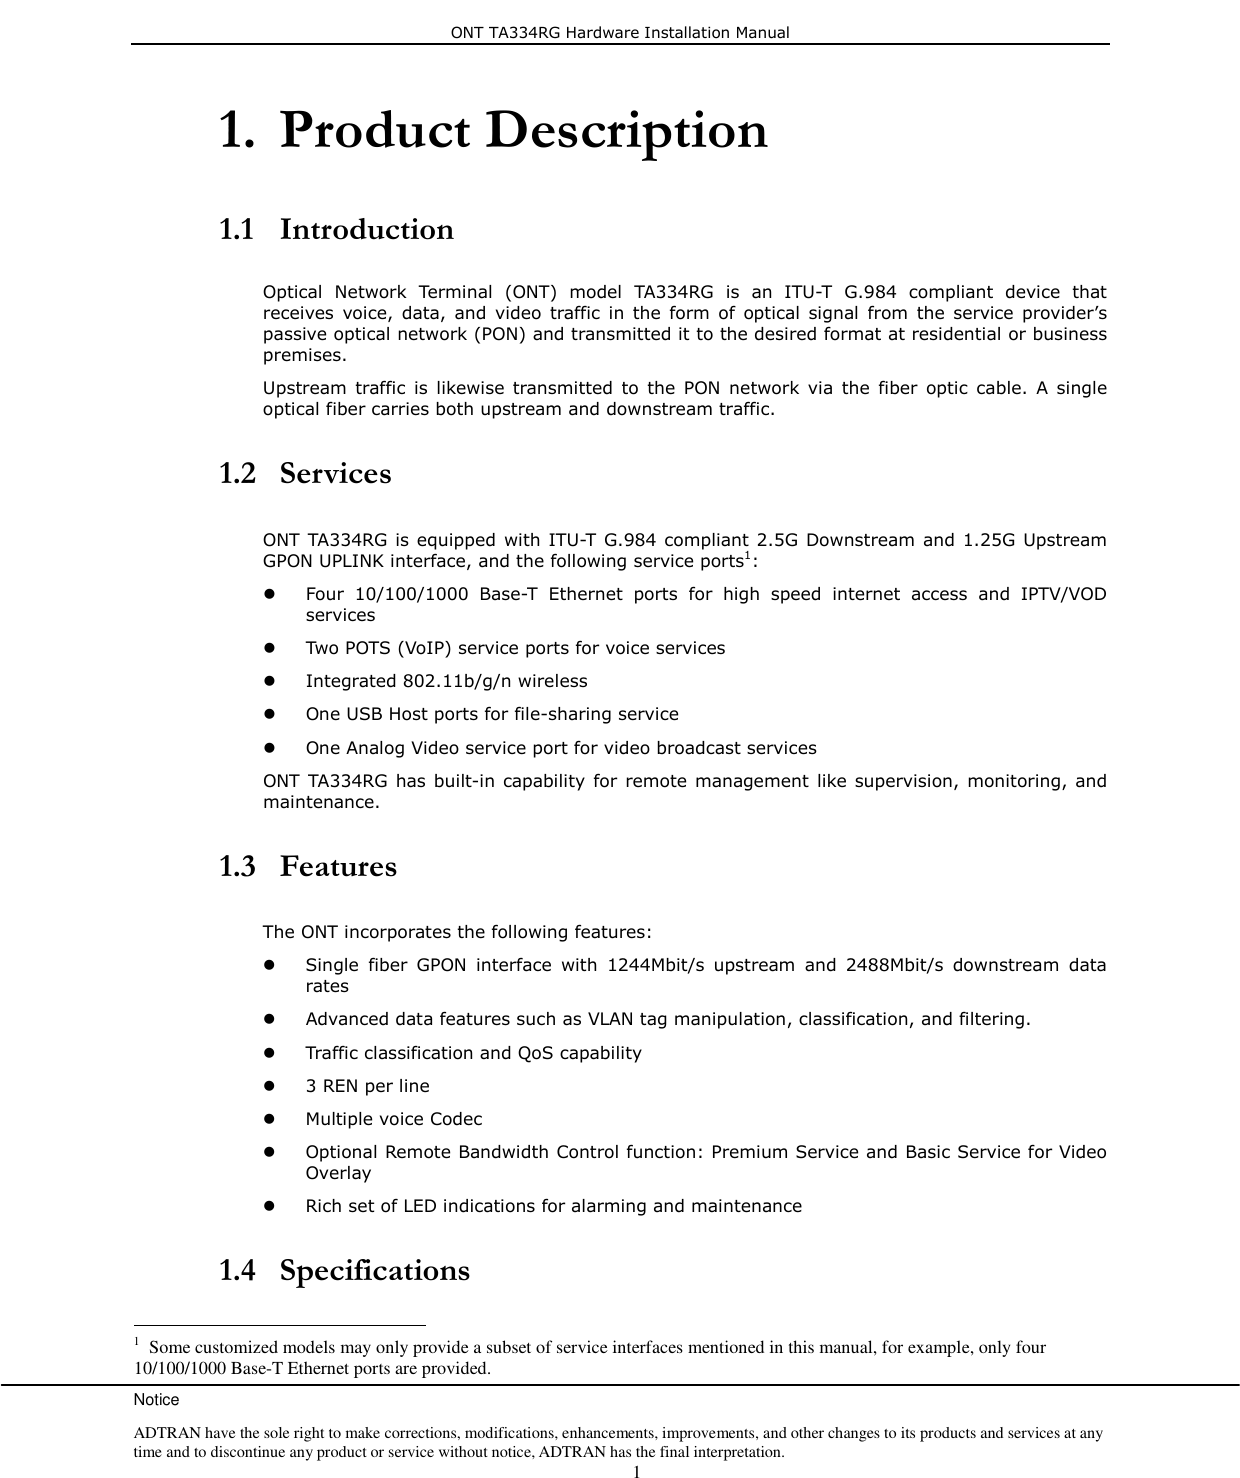 ONT TA334RG Hardware Installation Manual Notice ADTRAN have the sole right to make corrections, modifications, enhancements, improvements, and other changes to its products and services at any time and to discontinue any product or service without notice, ADTRAN has the final interpretation.    1 1. Product Description   1.1 Introduction  Optical  Network  Terminal  (ONT)  model  TA334RG  is  an  ITU-T  G.984  compliant  device  that receives  voice, data,  and  video  traffic in  the  form  of  optical signal  from  the  service provider’s passive optical network (PON) and transmitted it to the desired format at residential or business premises. Upstream traffic  is  likewise  transmitted  to  the  PON  network  via  the  fiber  optic  cable.  A  single optical fiber carries both upstream and downstream traffic.  1.2 Services  ONT TA334RG is equipped with ITU-T G.984 compliant 2.5G Downstream and 1.25G Upstream GPON UPLINK interface, and the following service ports1:  Four  10/100/1000  Base-T  Ethernet  ports  for  high  speed  internet  access  and  IPTV/VOD services  Two POTS (VoIP) service ports for voice services  Integrated 802.11b/g/n wireless  One USB Host ports for file-sharing service    One Analog Video service port for video broadcast services ONT TA334RG has built-in capability for  remote management like supervision, monitoring, and maintenance.  1.3 Features  The ONT incorporates the following features:  Single  fiber  GPON  interface  with  1244Mbit/s  upstream  and  2488Mbit/s  downstream  data rates  Advanced data features such as VLAN tag manipulation, classification, and filtering.  Traffic classification and QoS capability  3 REN per line  Multiple voice Codec  Optional Remote Bandwidth Control function: Premium Service and Basic Service for Video Overlay  Rich set of LED indications for alarming and maintenance  1.4 Specifications                                                        1  Some customized models may only provide a subset of service interfaces mentioned in this manual, for example, only four 10/100/1000 Base-T Ethernet ports are provided. 